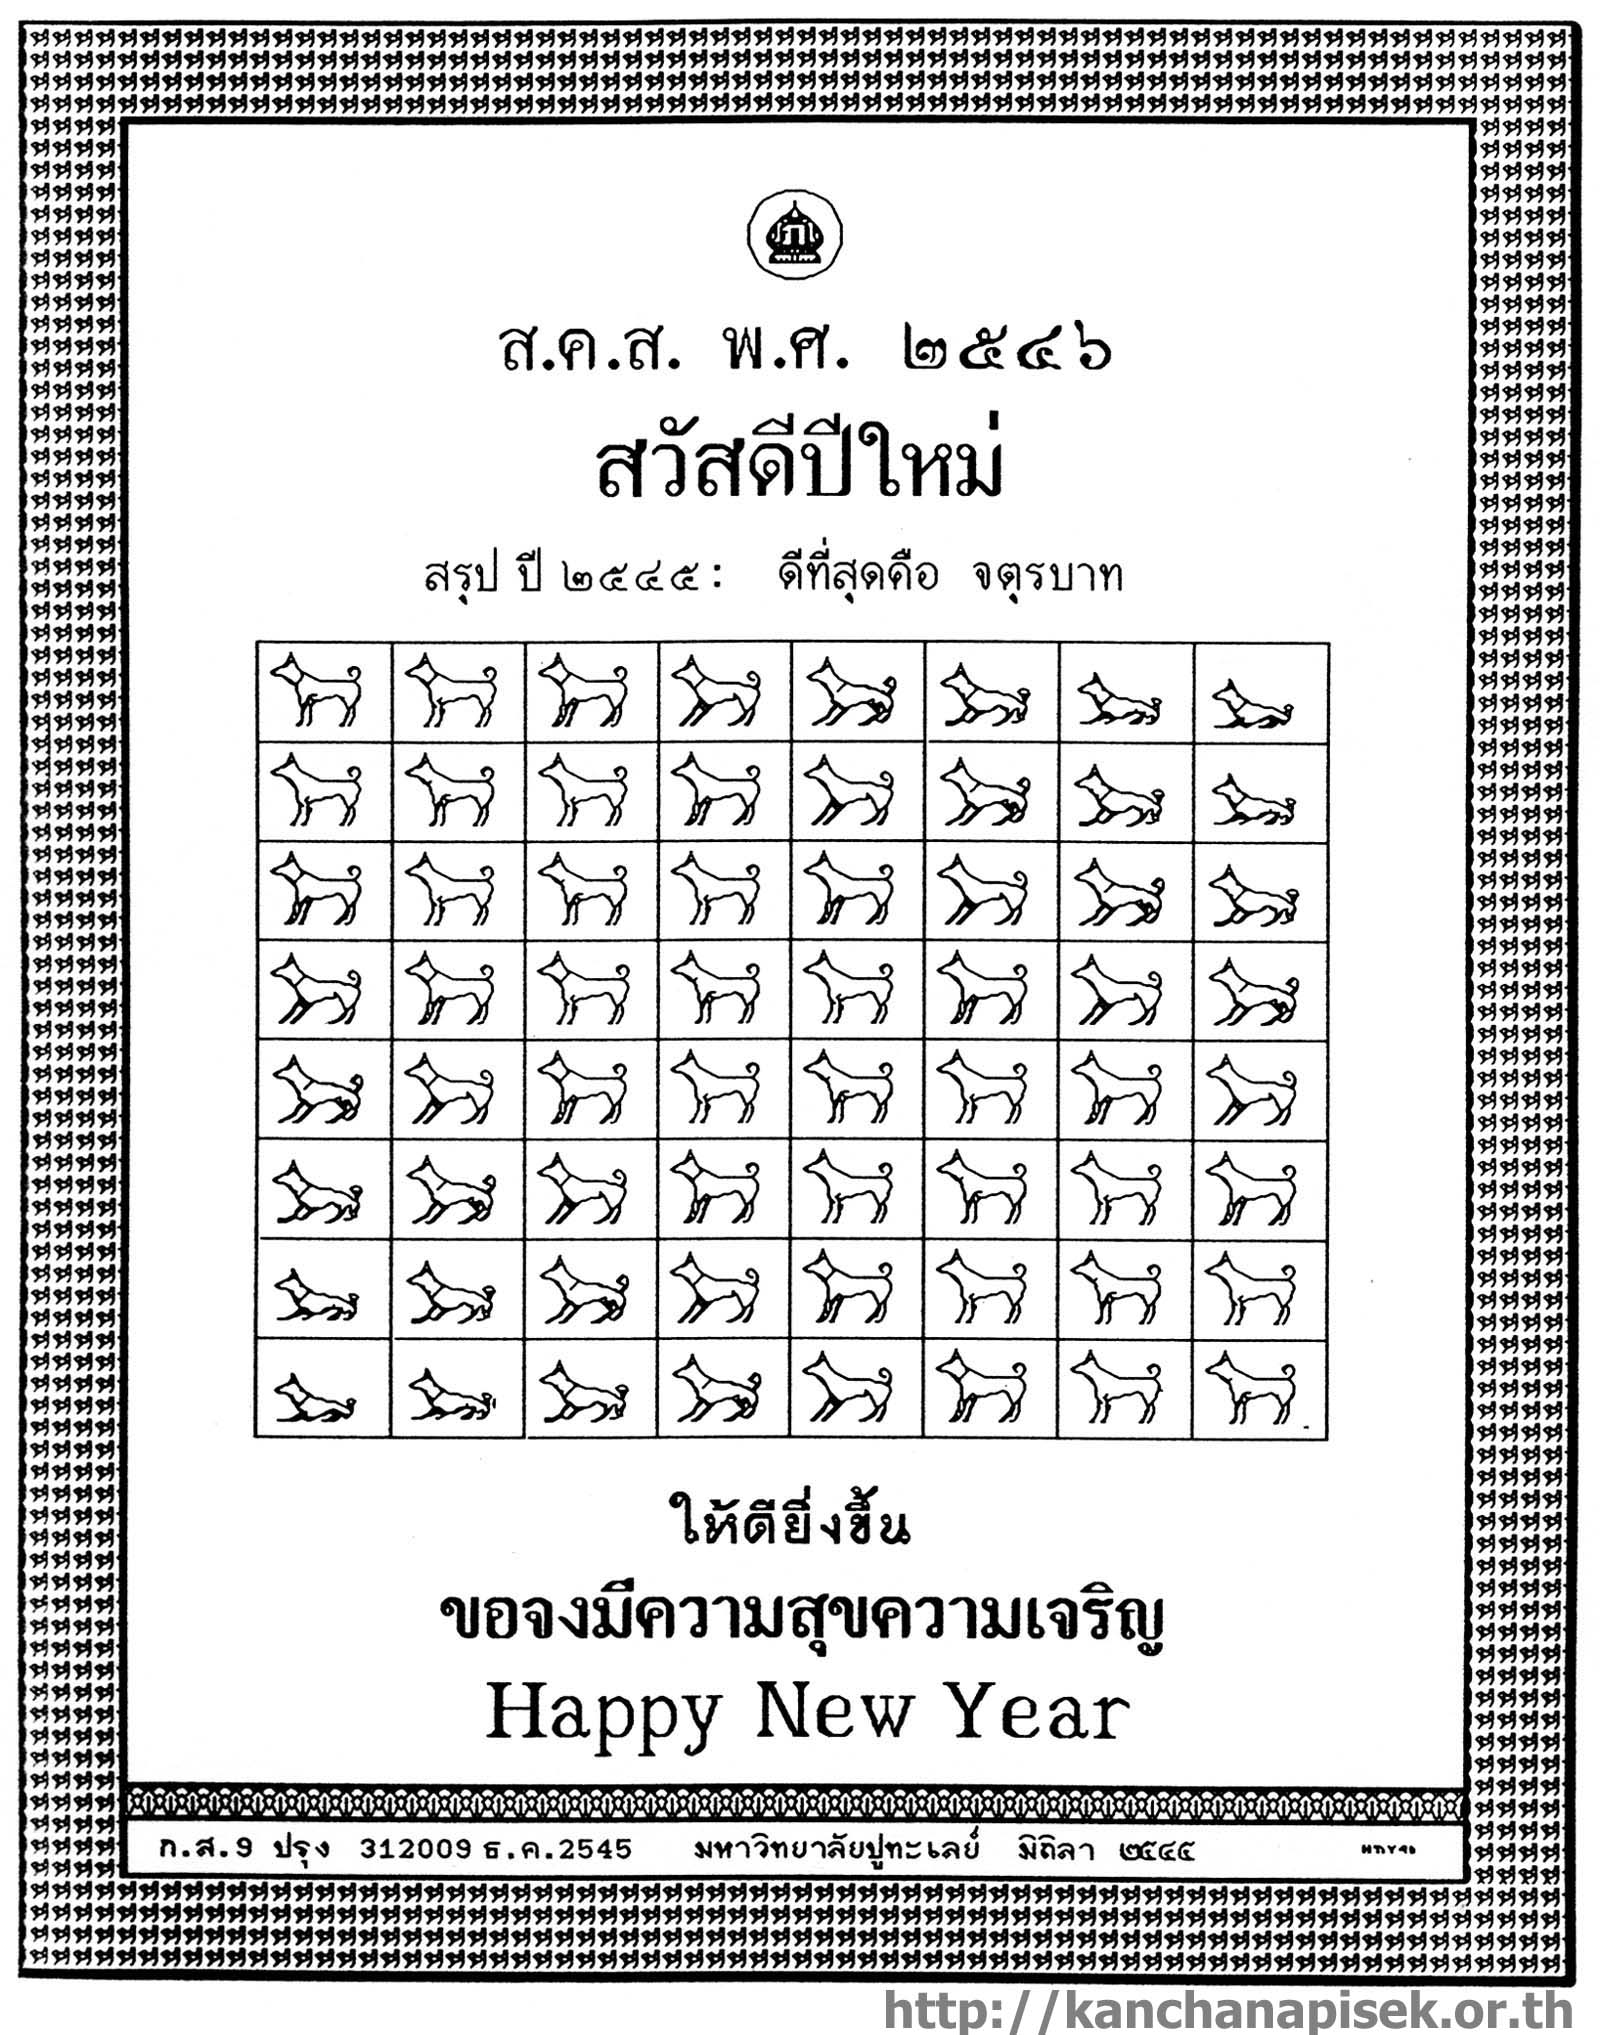 the new year card, 1600 pixels, 412KB.